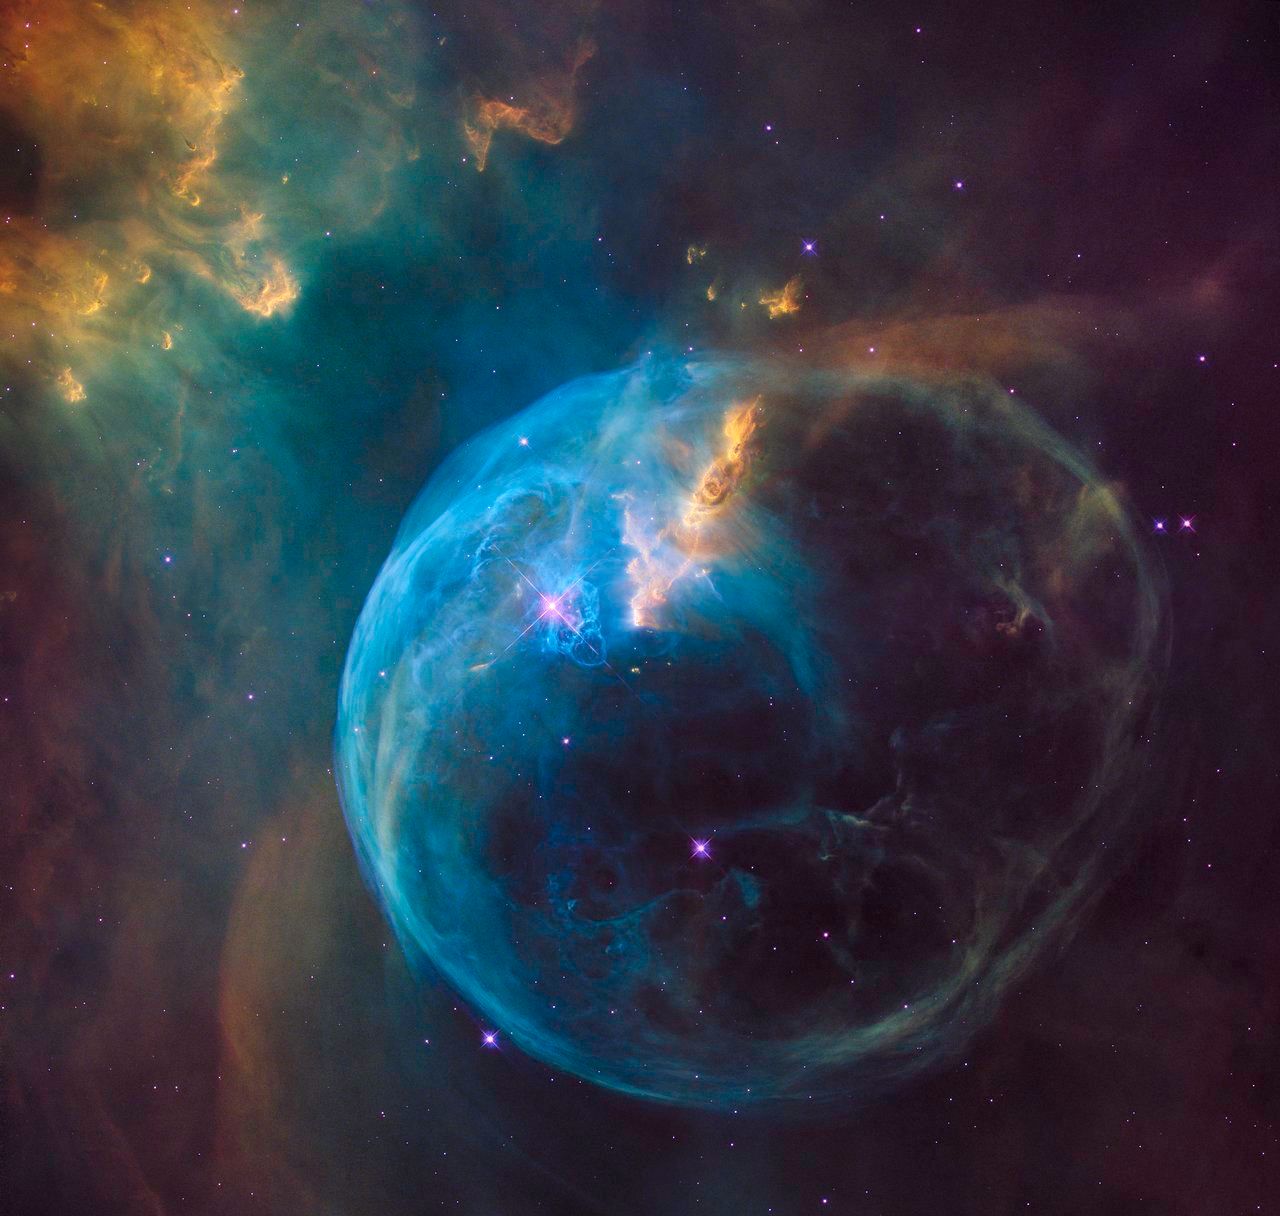 A spectacular new view of the Bubble Nebula to celebrate Hubble's 26th year in space.